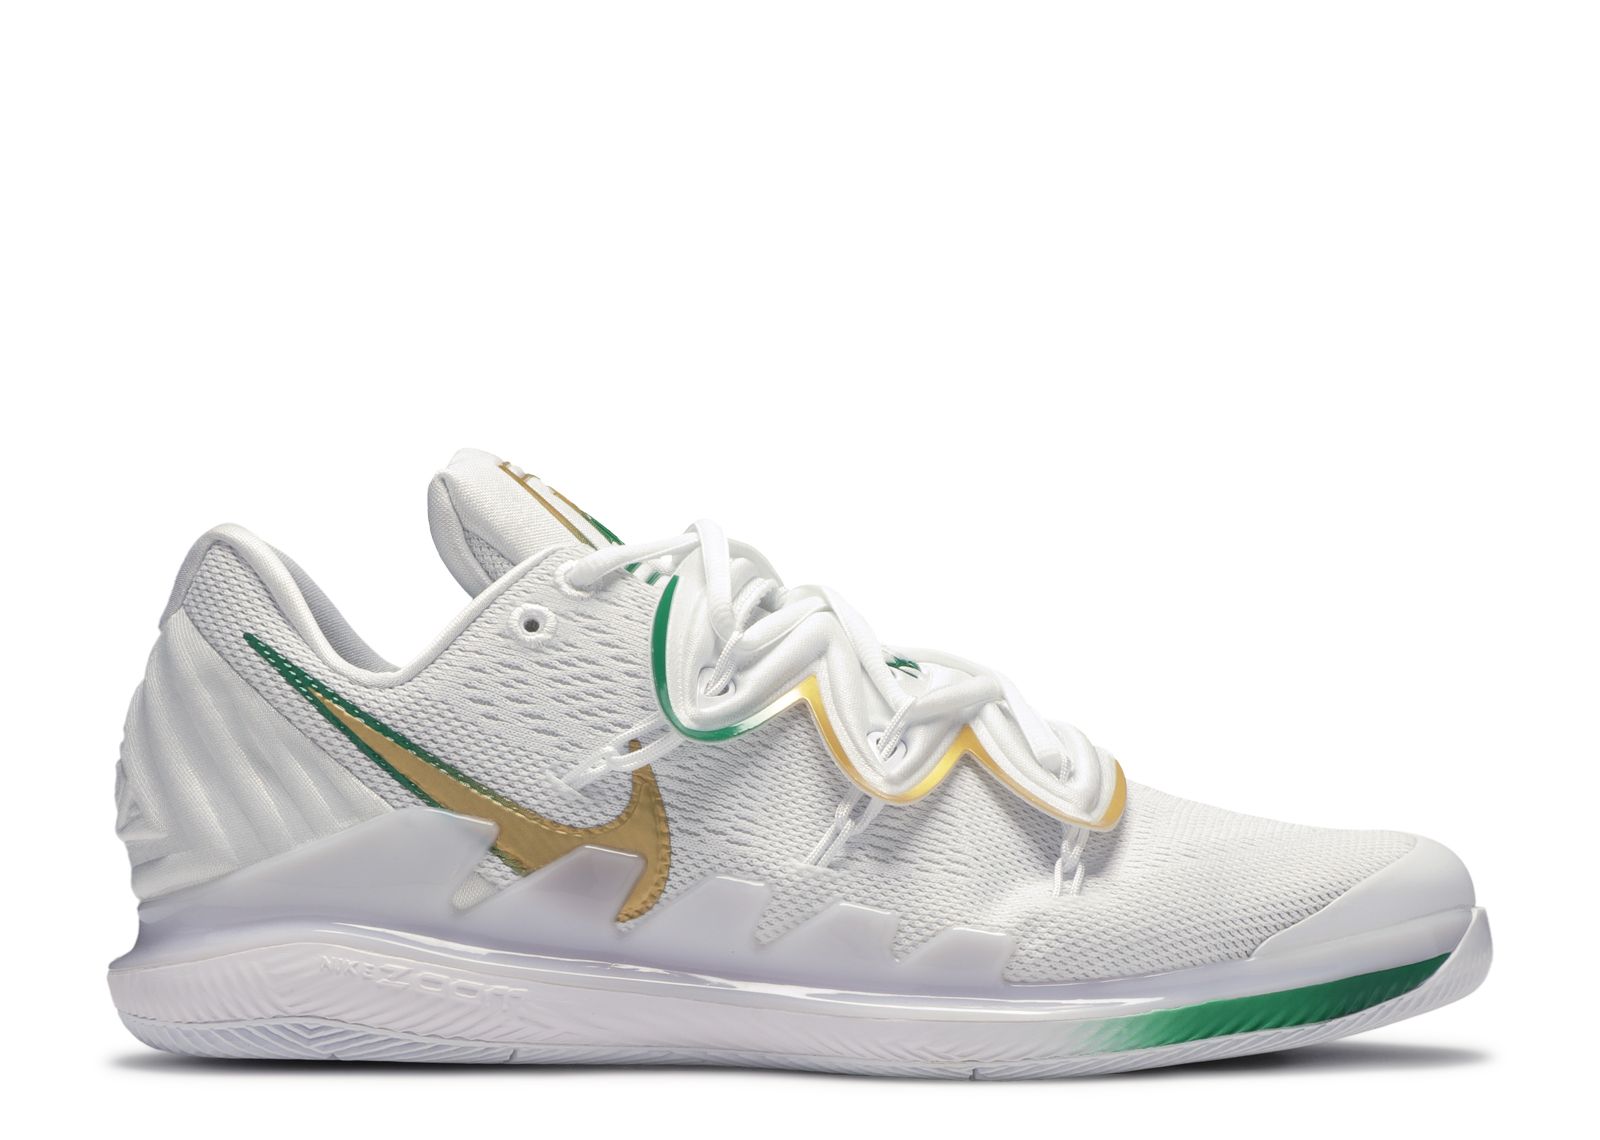 kyrie irving clover shoes